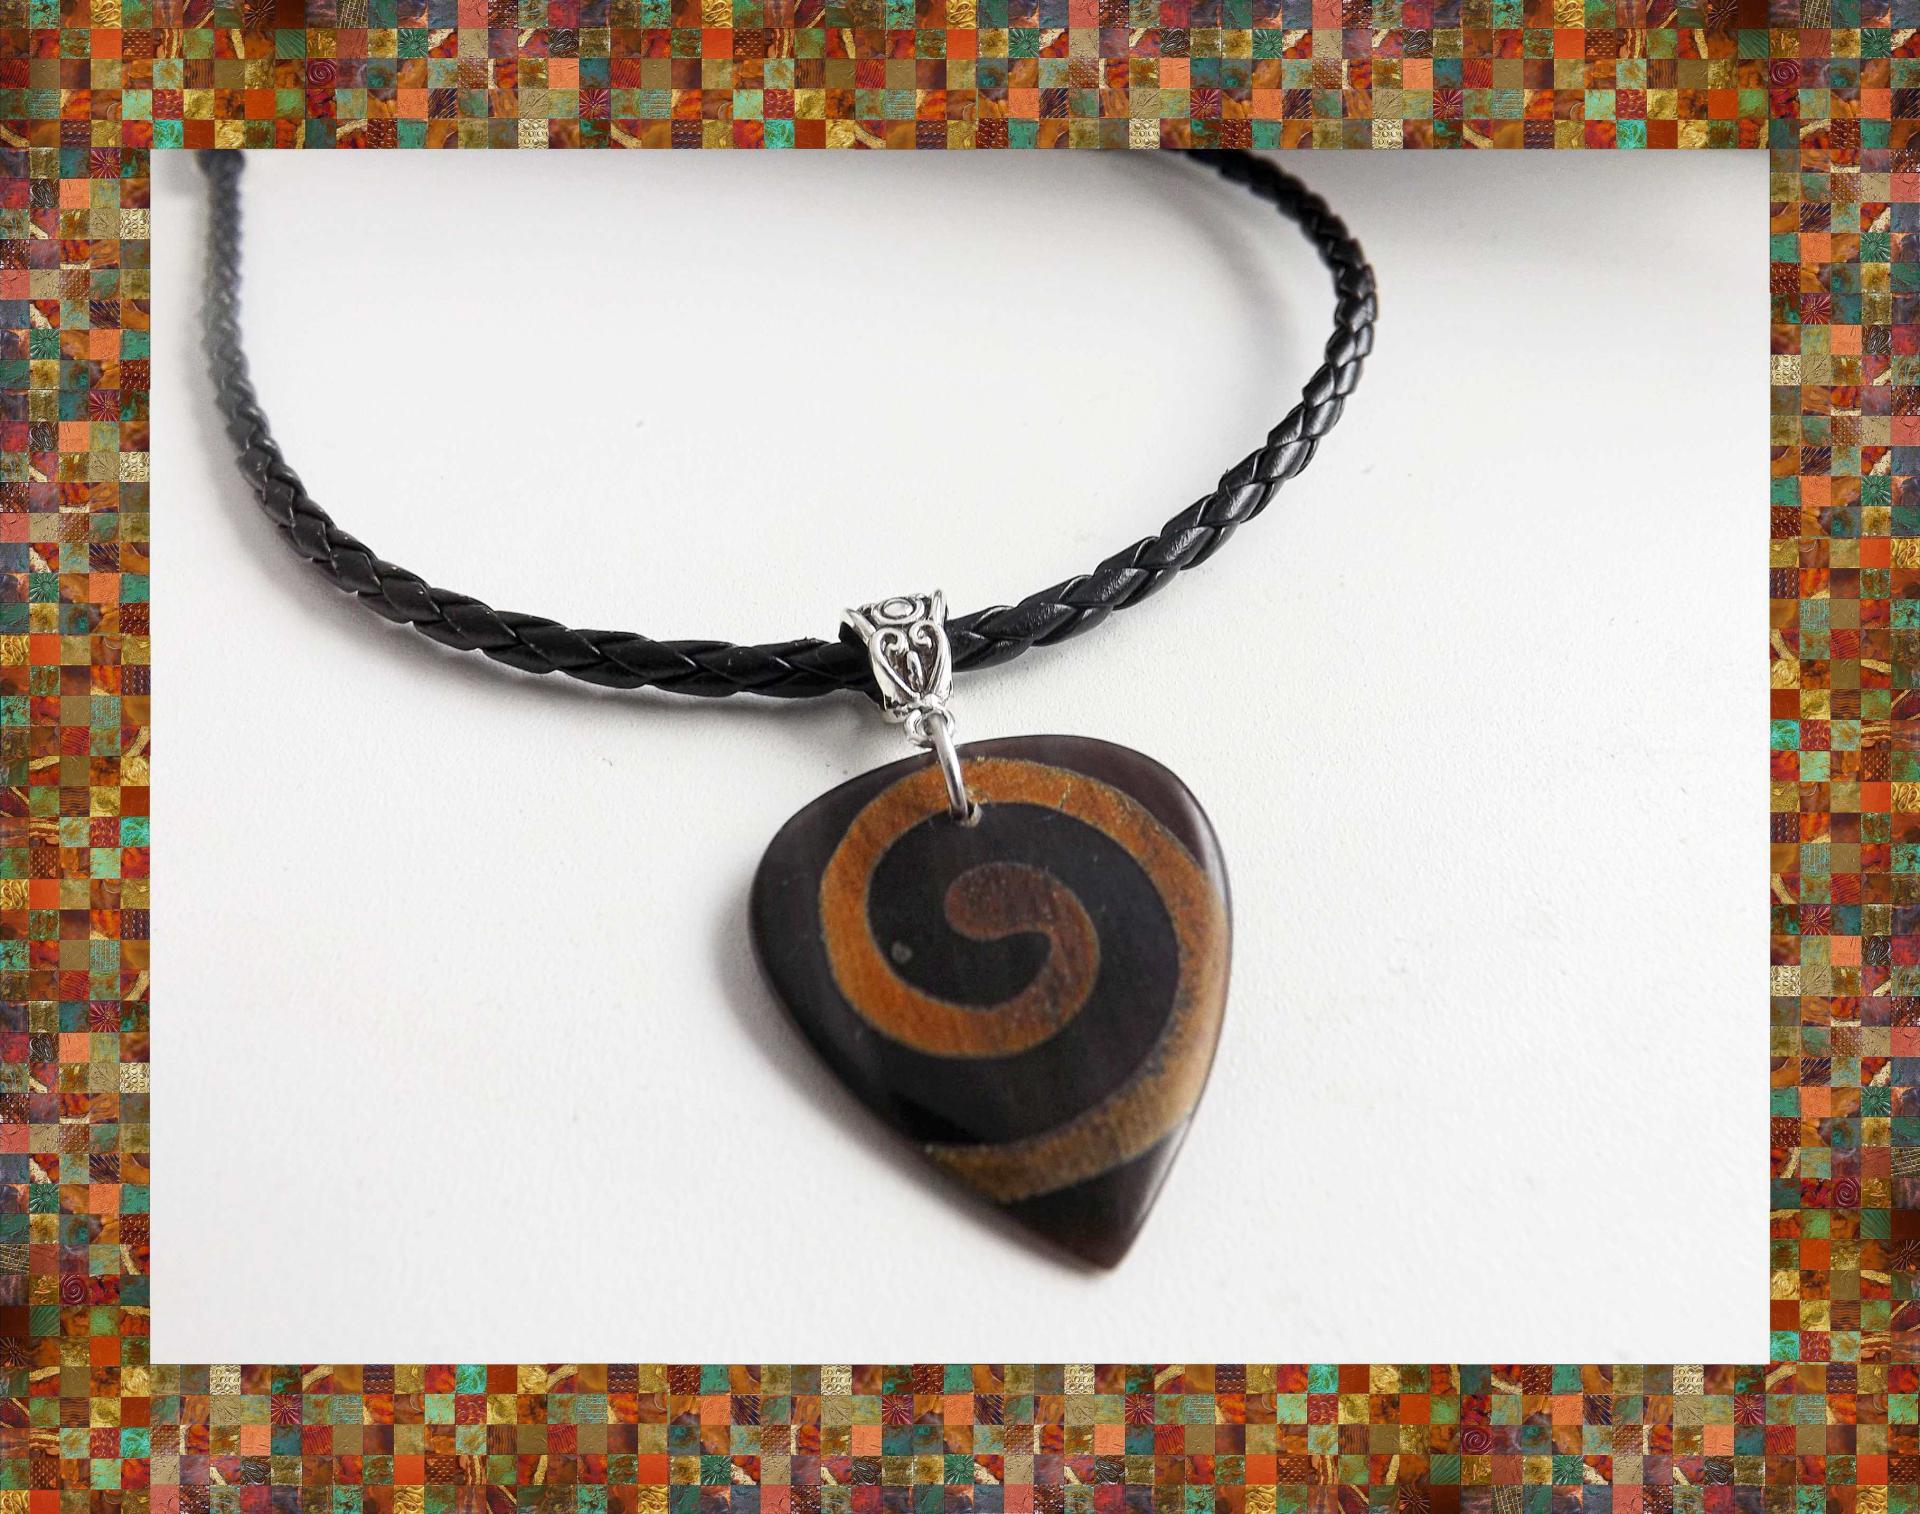 Tribal Tone Timber Guitar Pick Choker - SPECIAL EDITION Snake, Anemone or Starfi